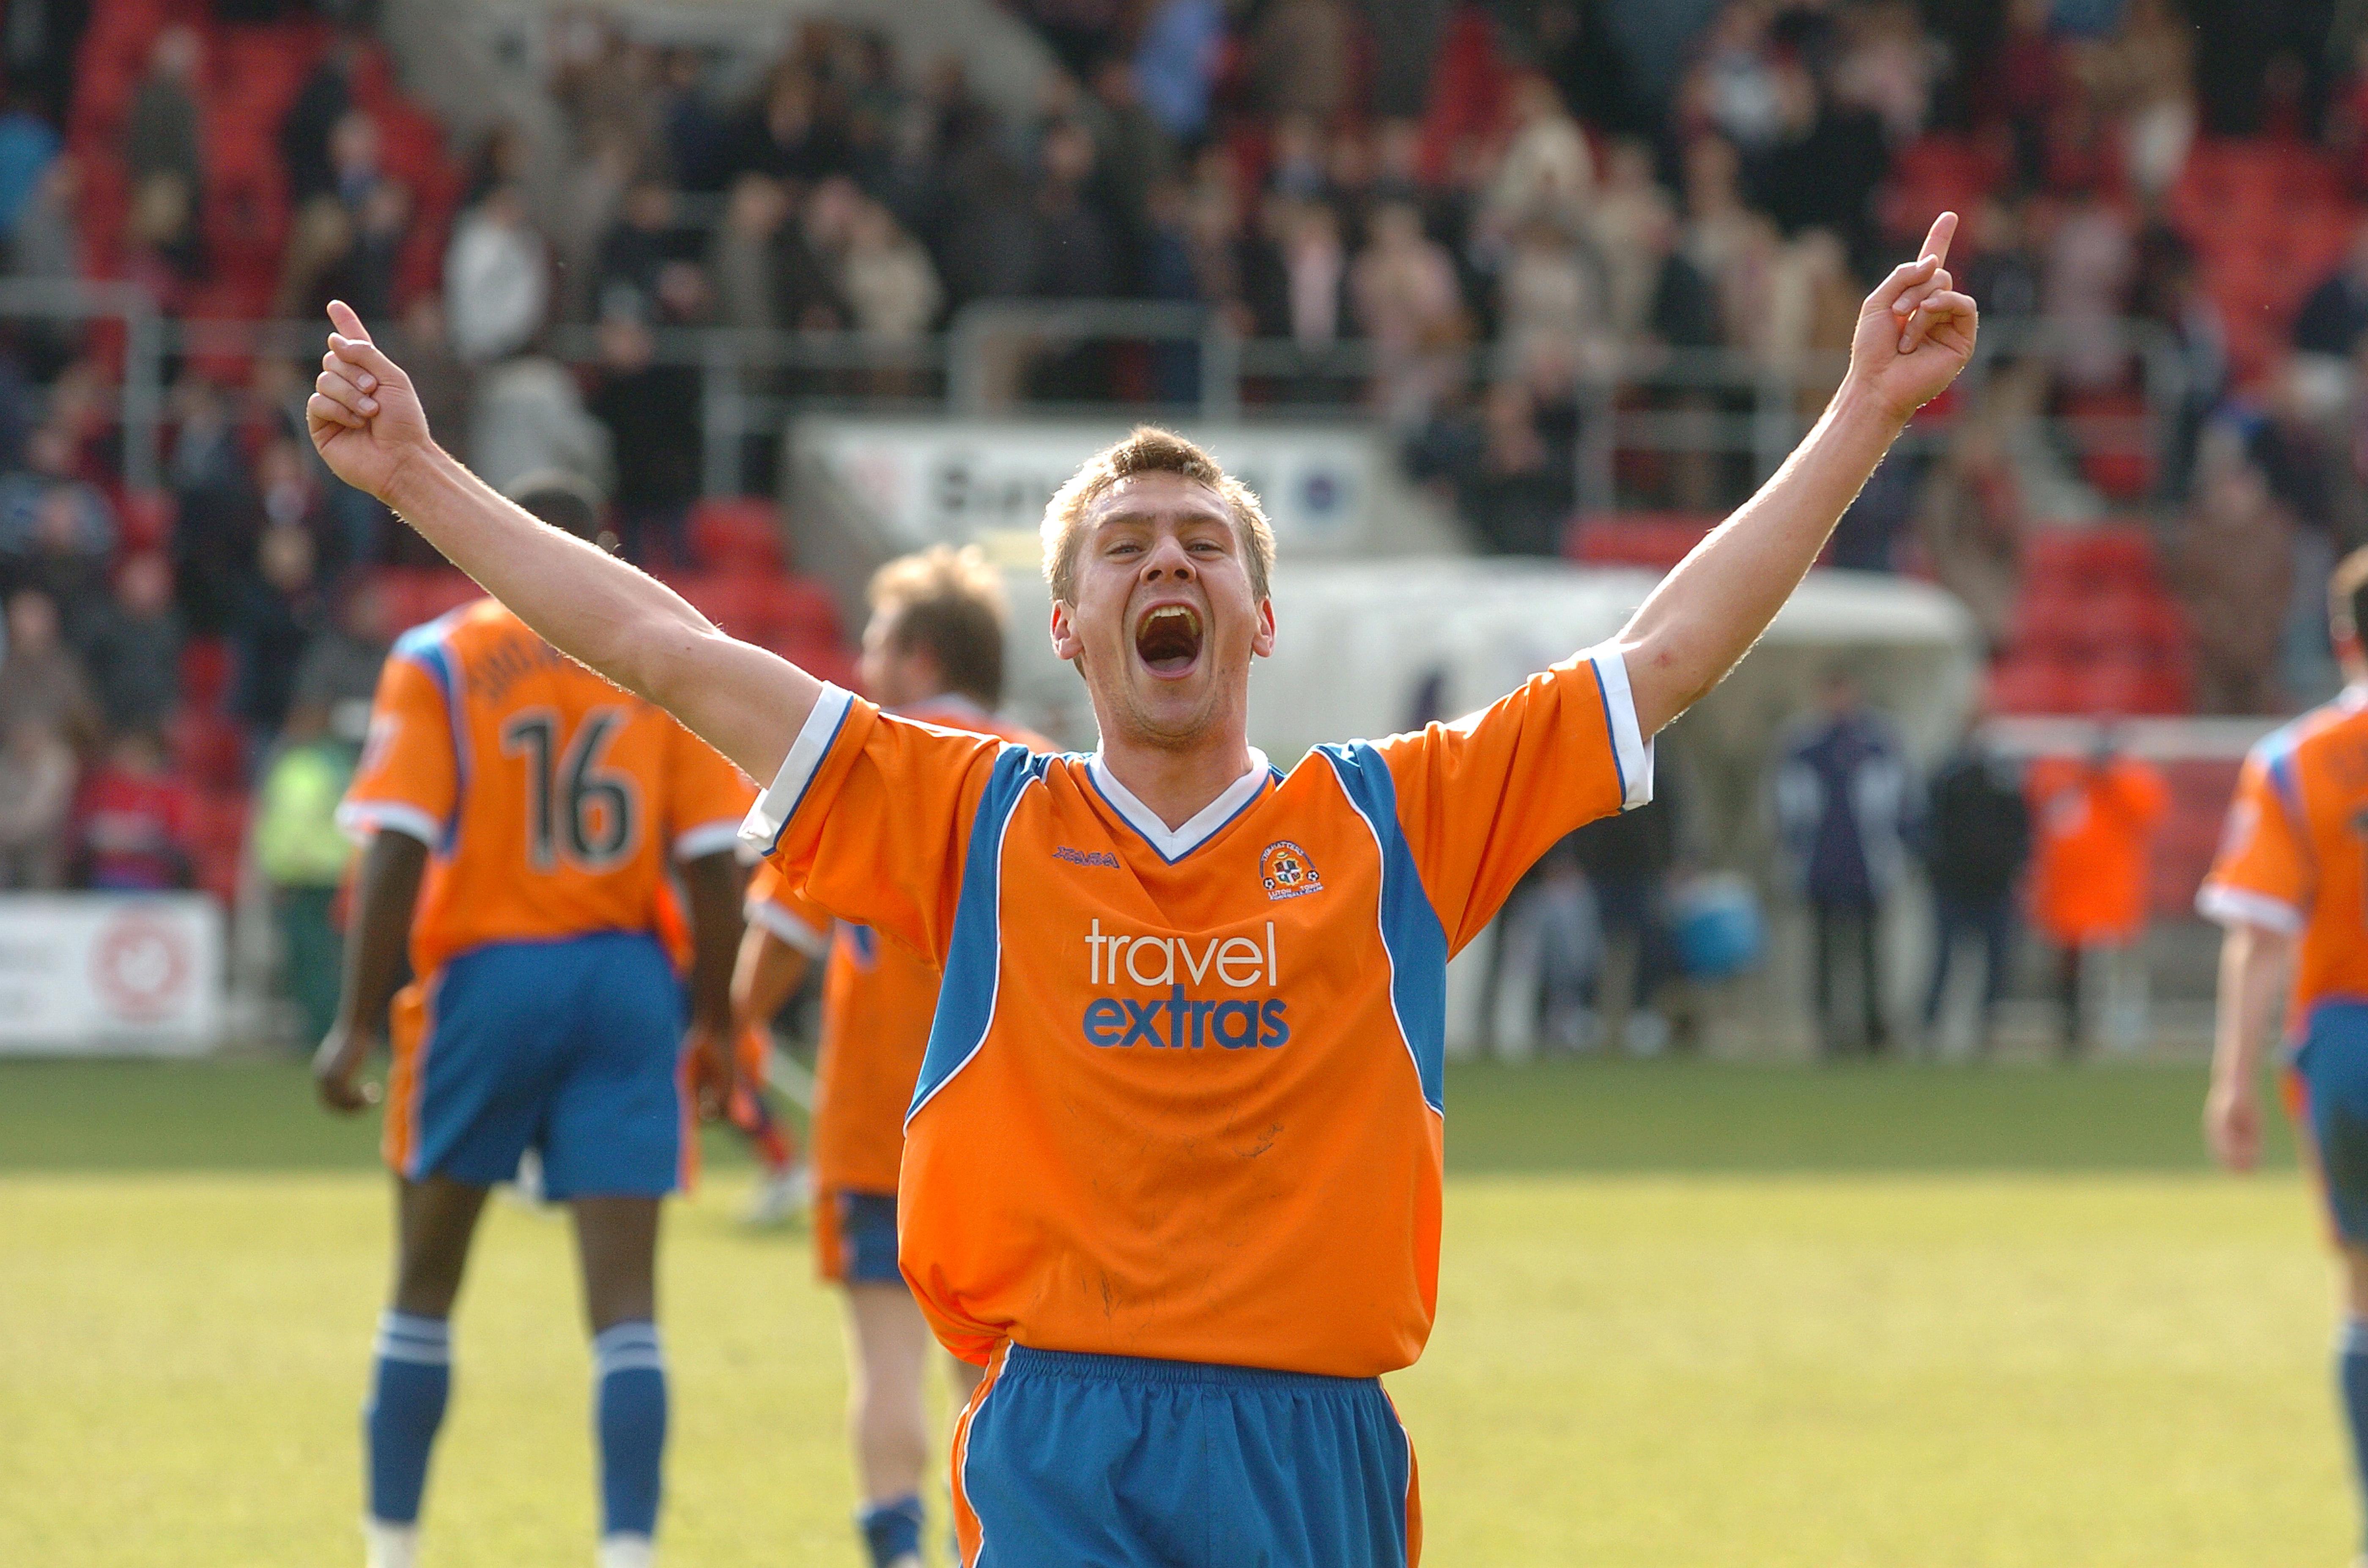 Sol Davis celebrates in front of the Luton supporters